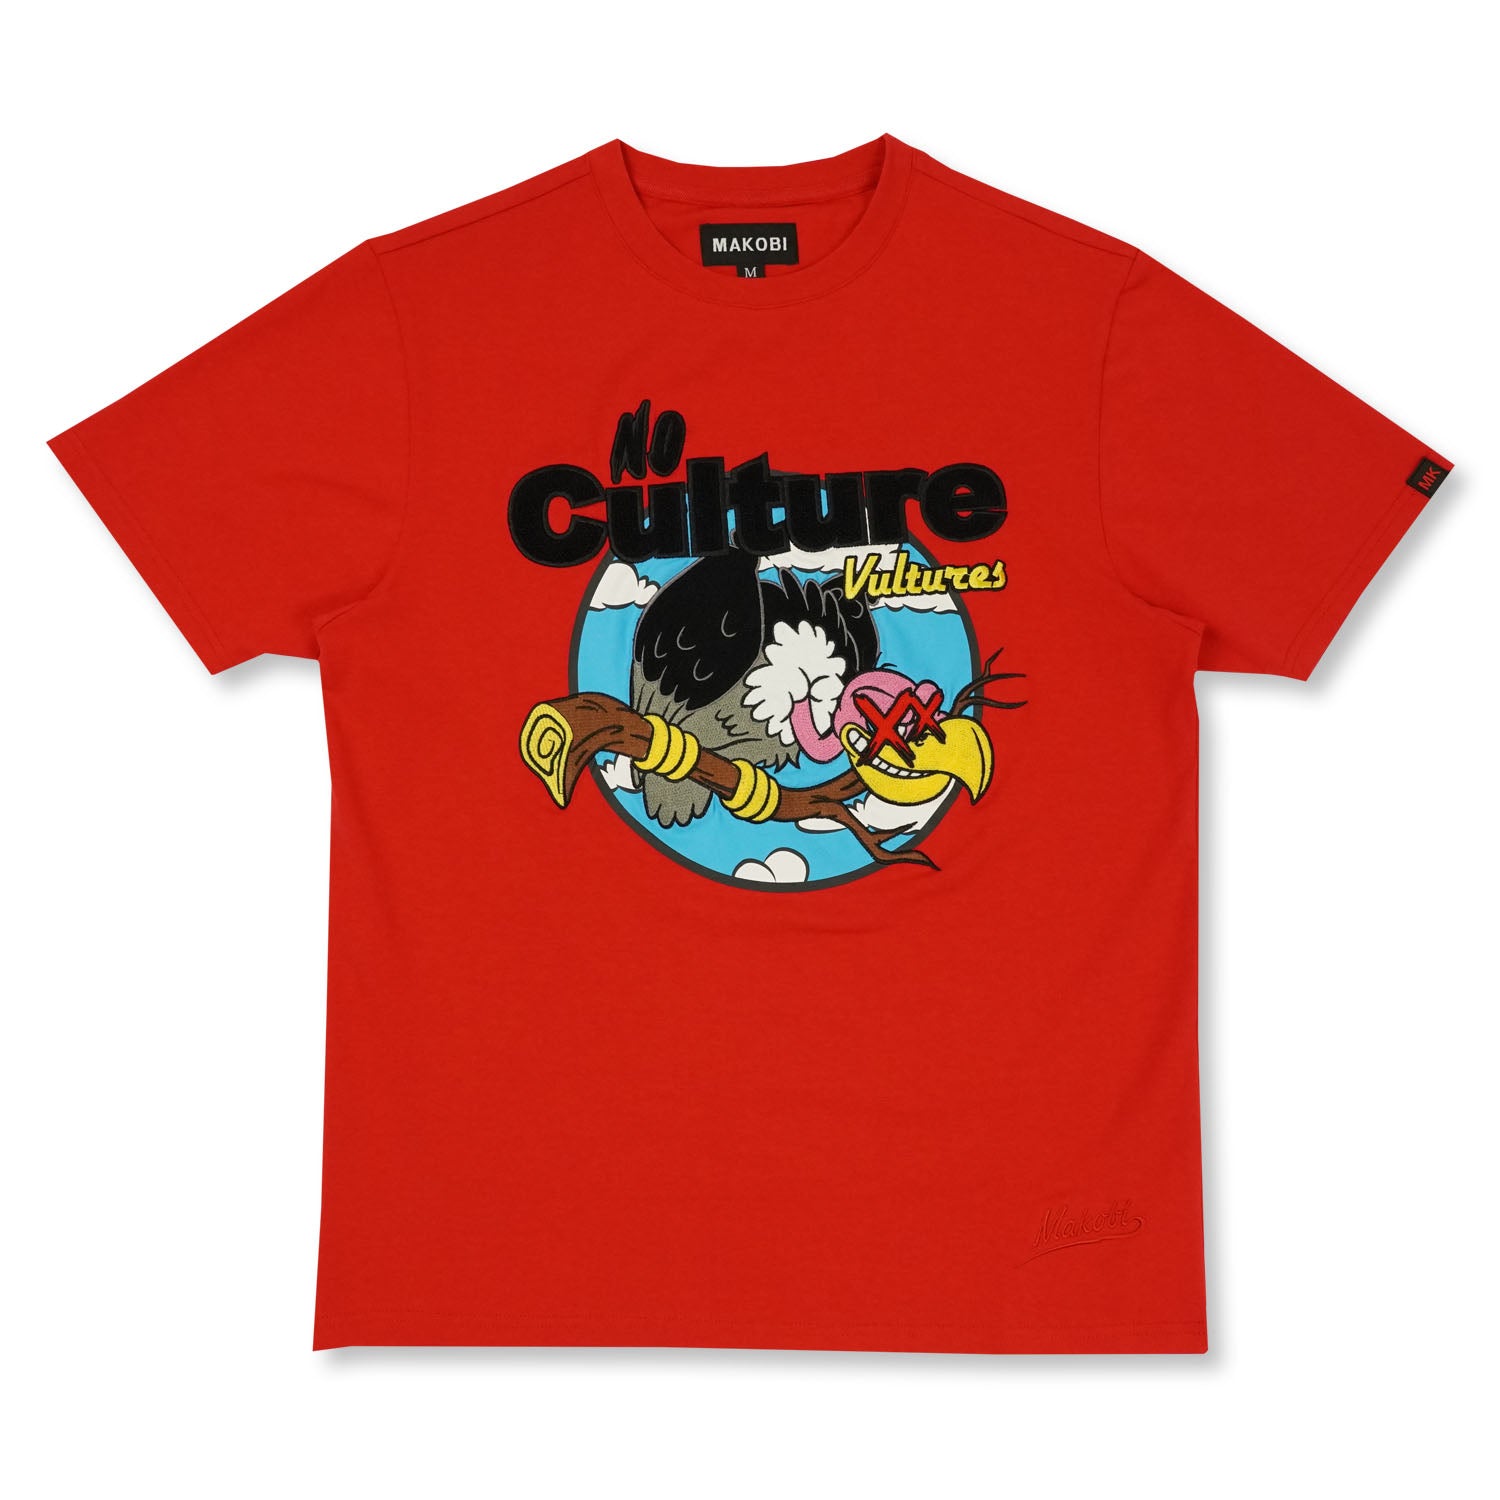 M370 No Culture Vultures Tee - Red